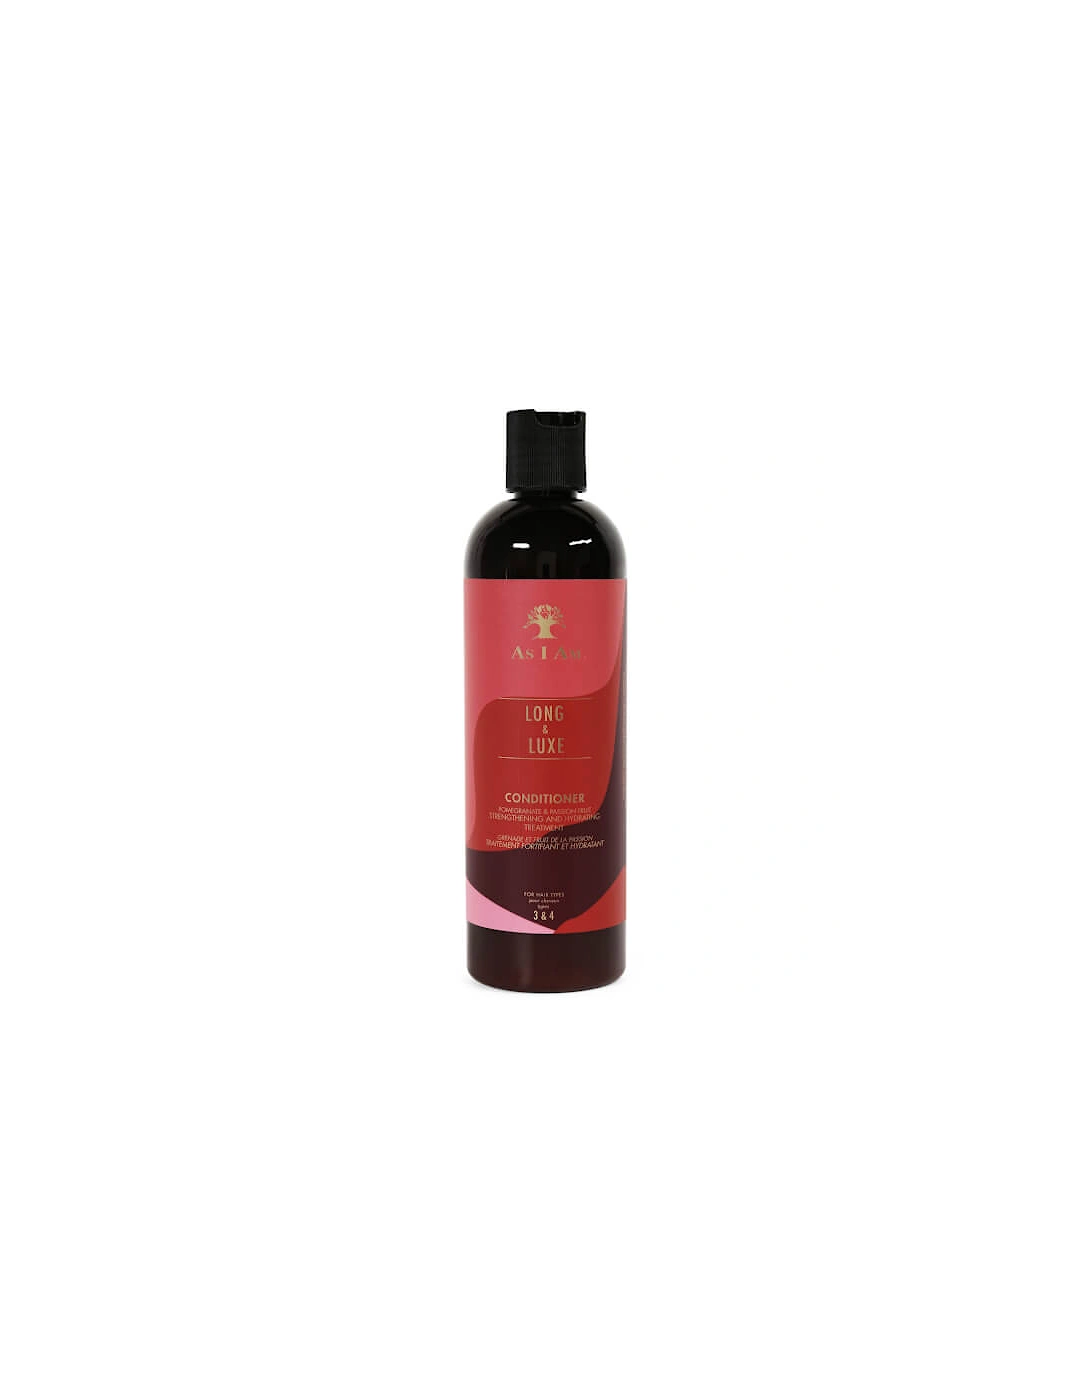 Long and Luxe Conditioner 355ml - As I Am, 2 of 1